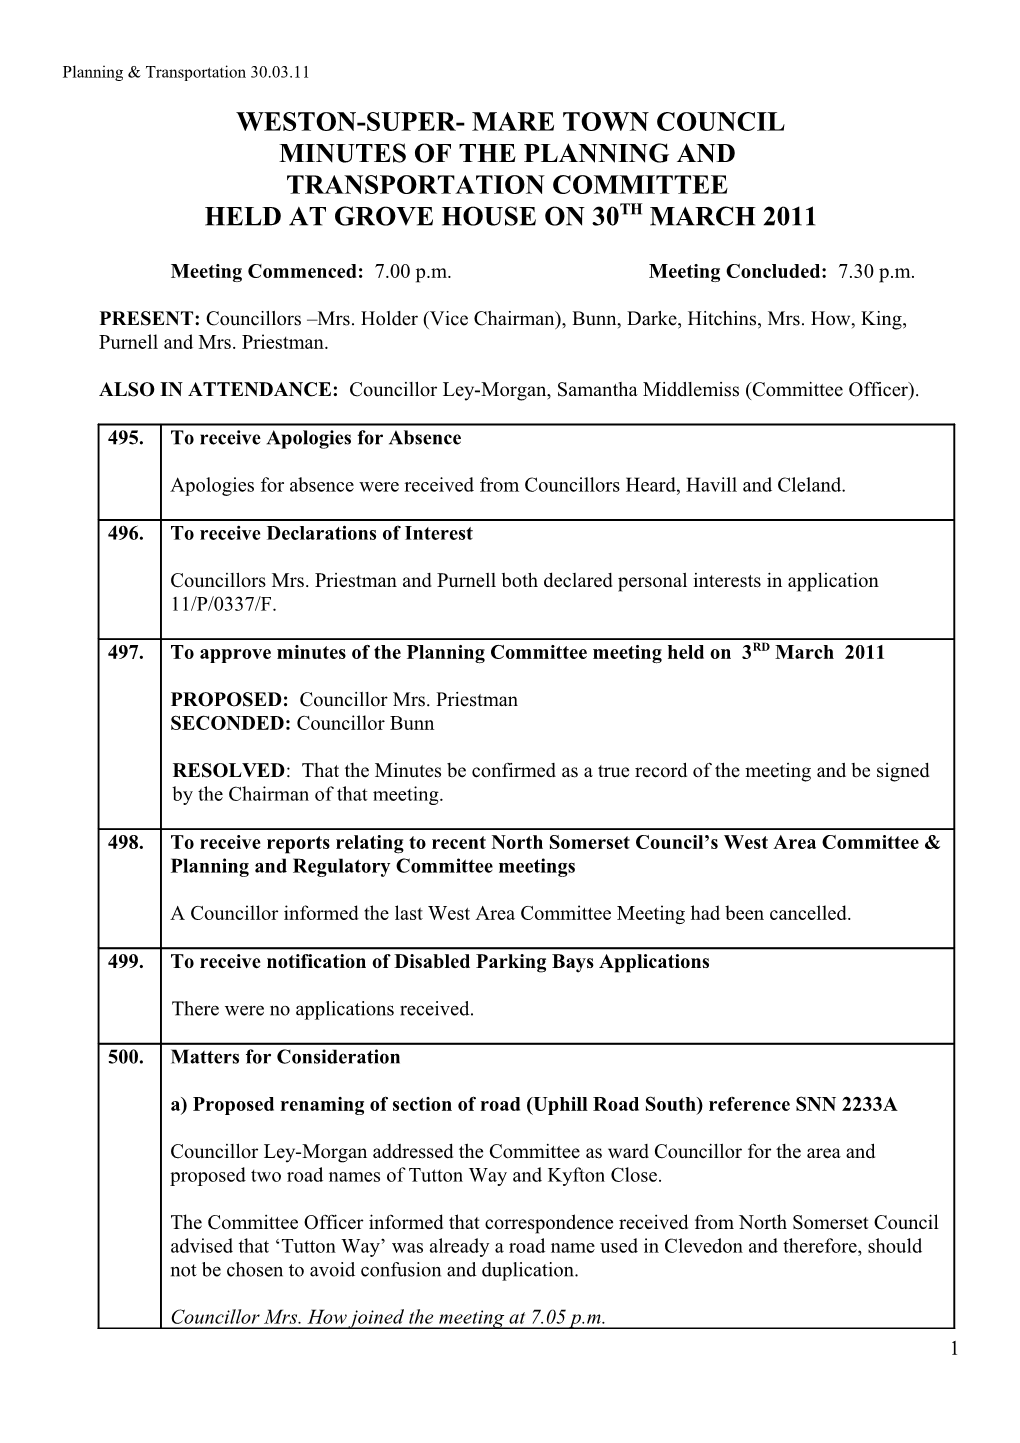 Weston-Super Mare Town Council Planning Committee